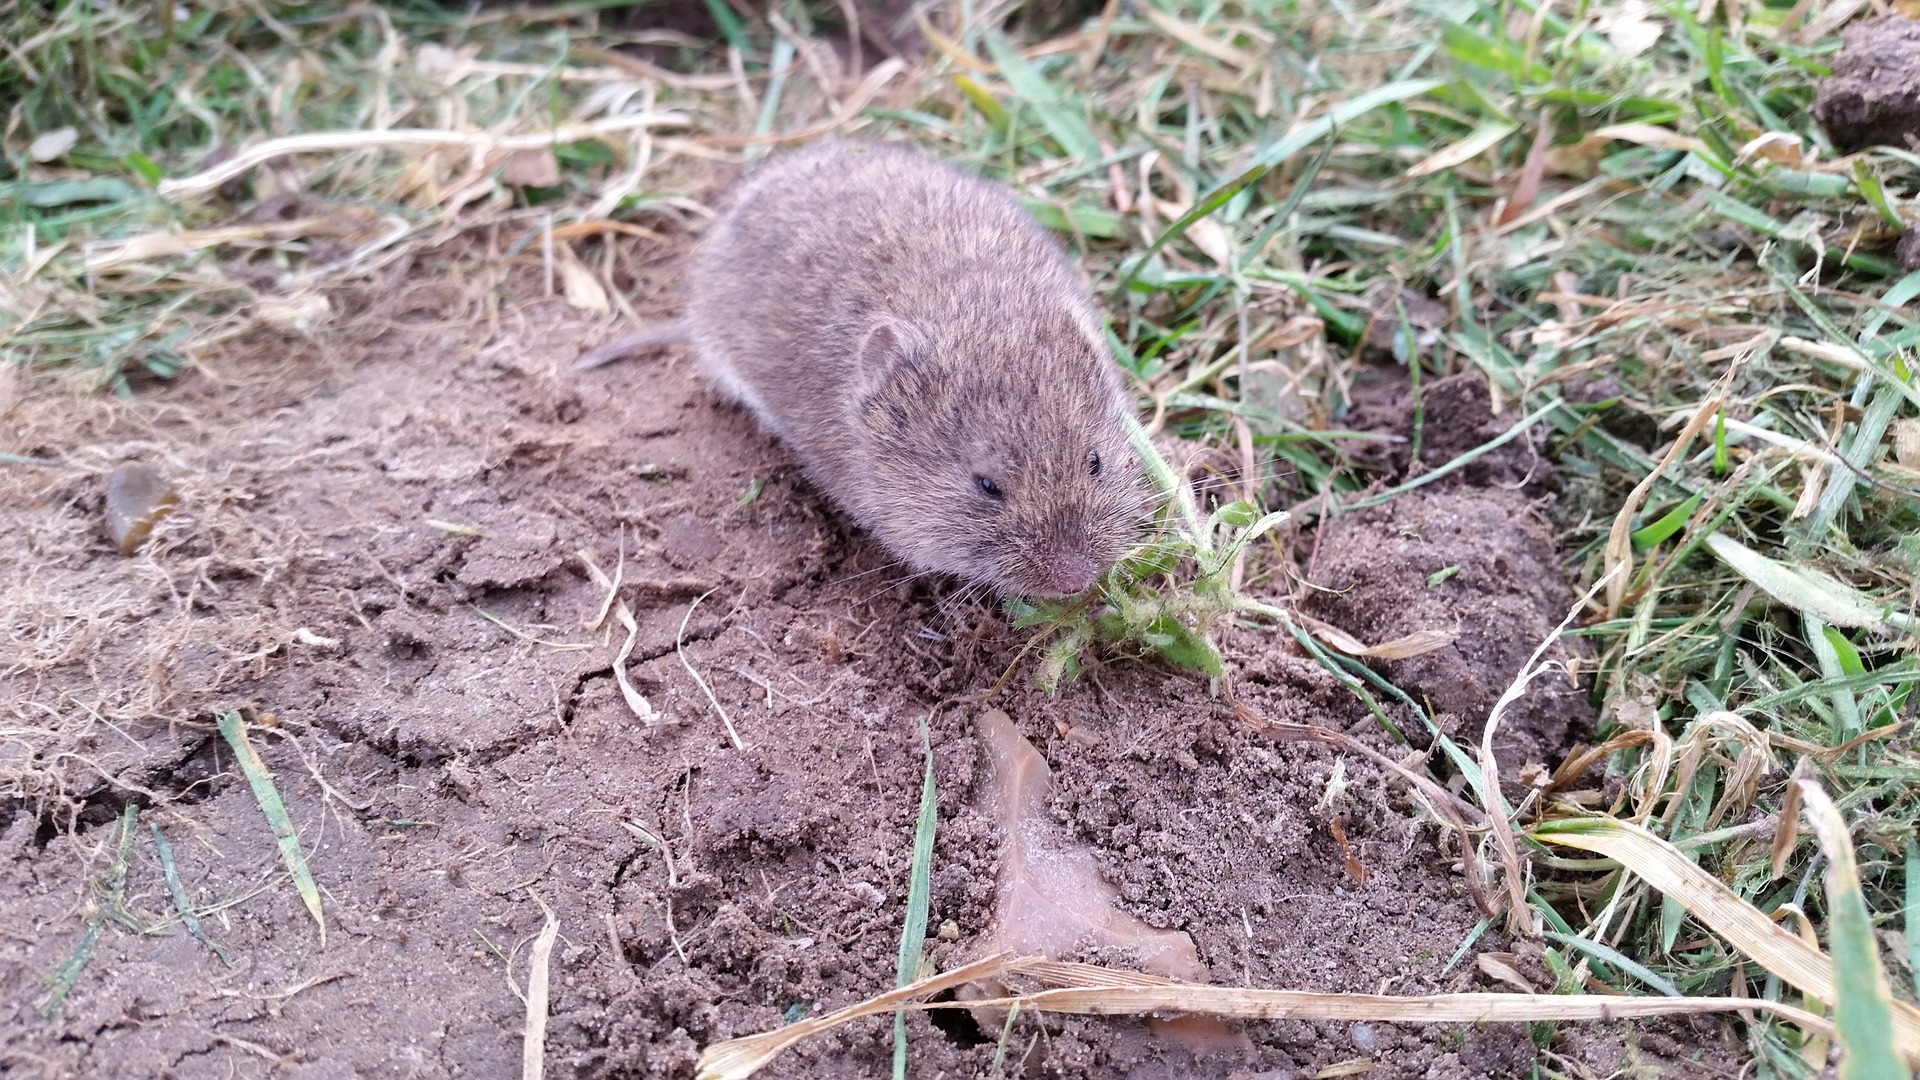 Voles How To Get Rid Of Voles In The Yard Or Garden The Old Farmer S Almanac,Eastlake Furniture Chairs